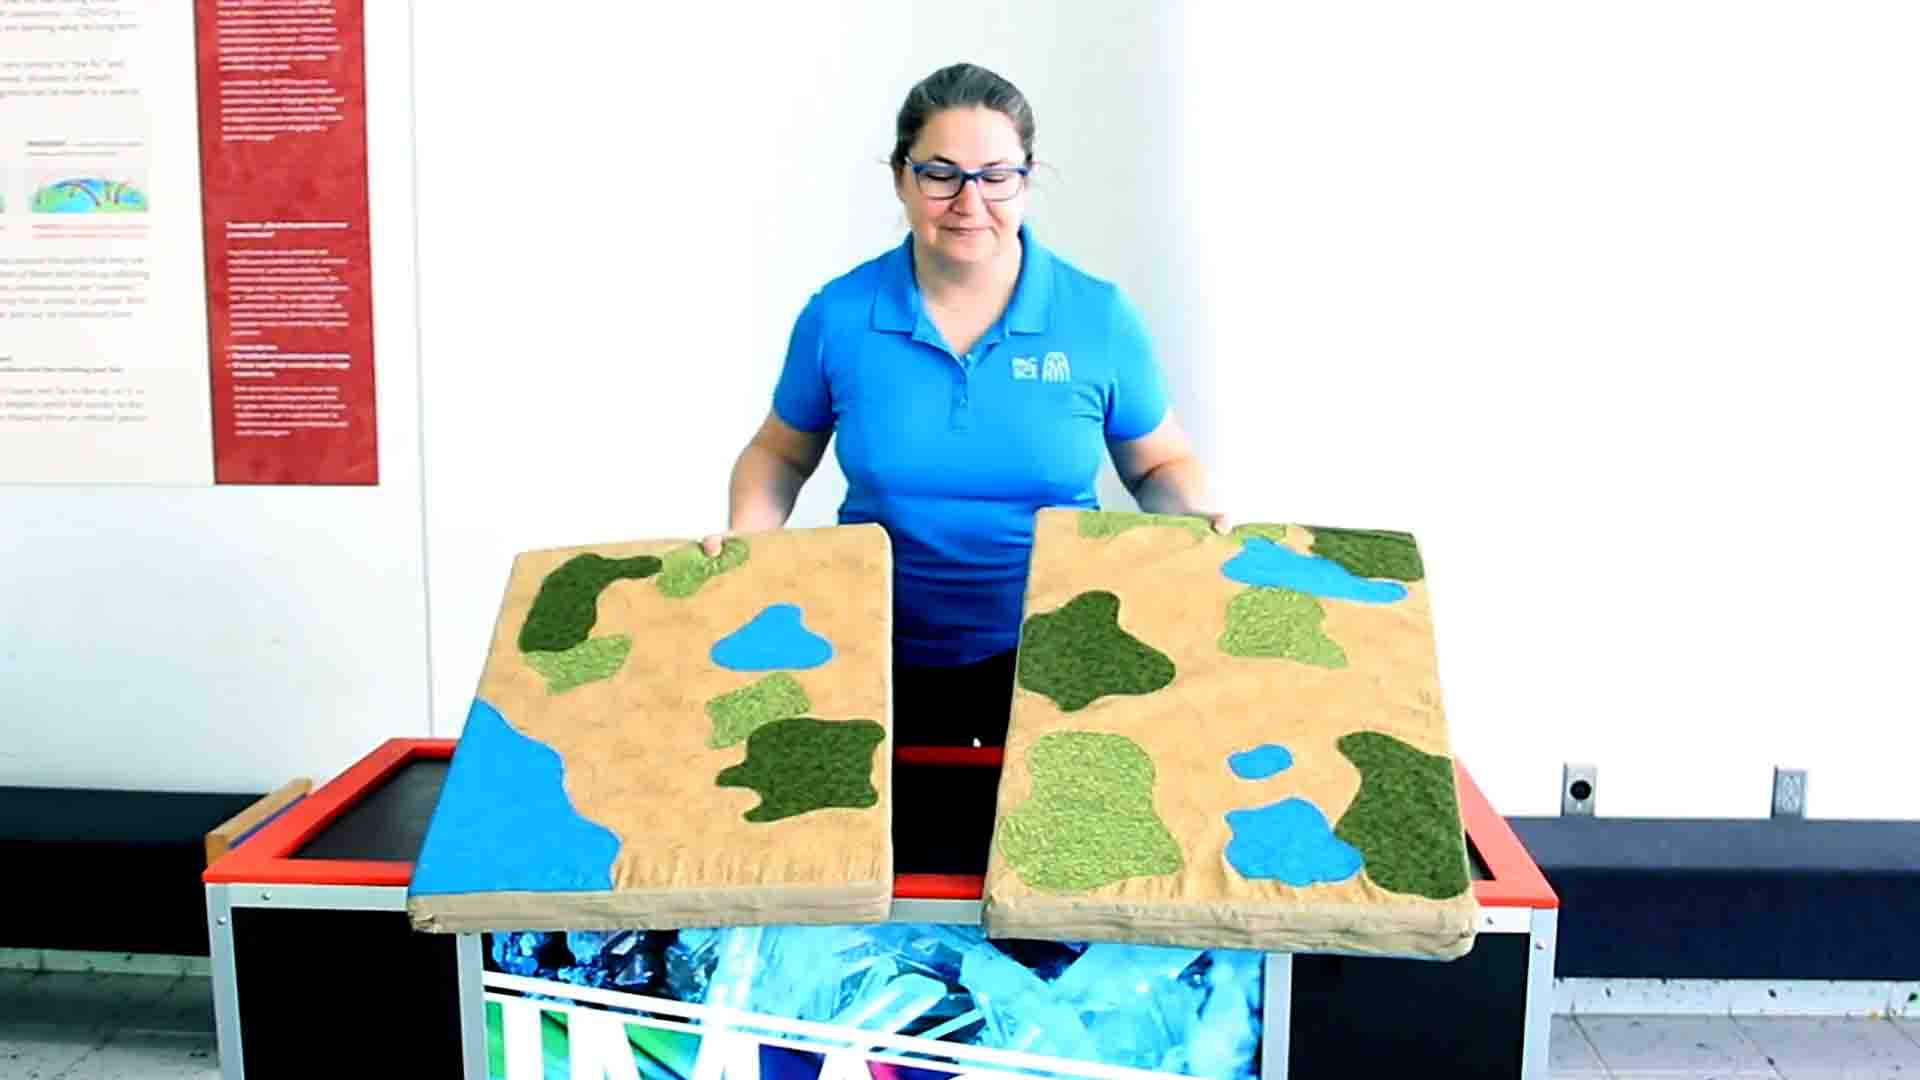 Educator Zeta holds two large pieces representing plate tectonics